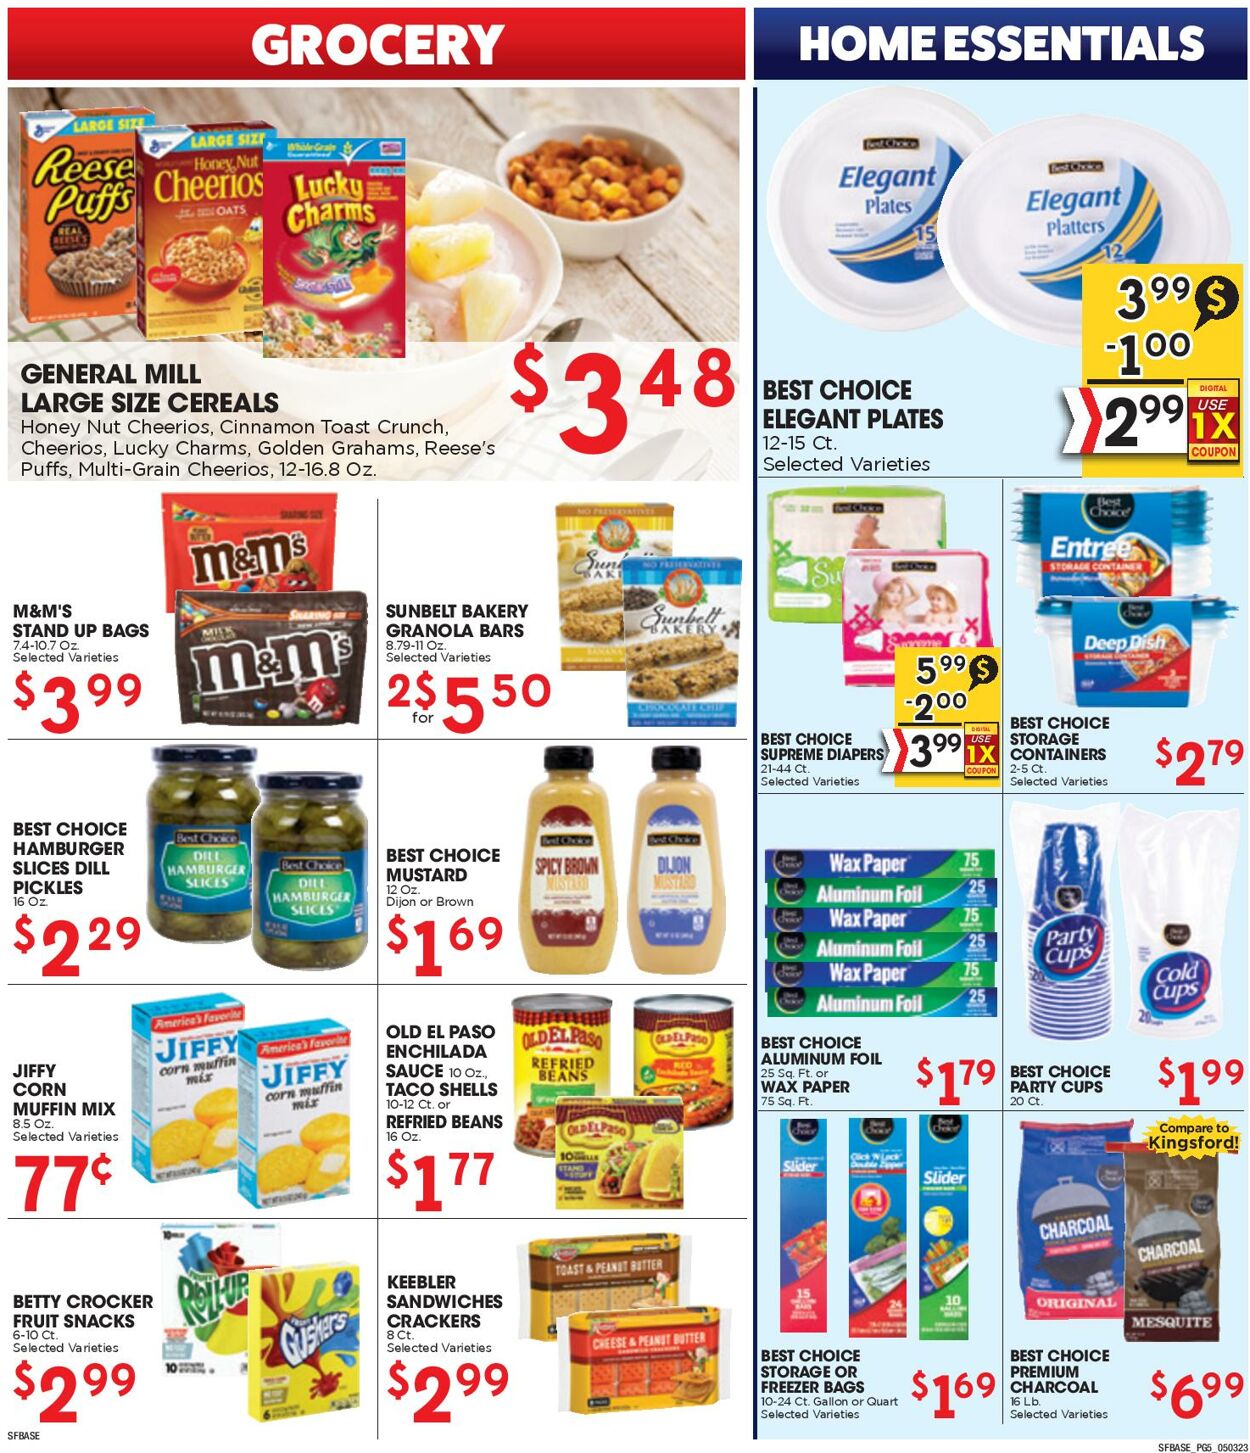 Sunshine Foods Ad from 05/03/2023